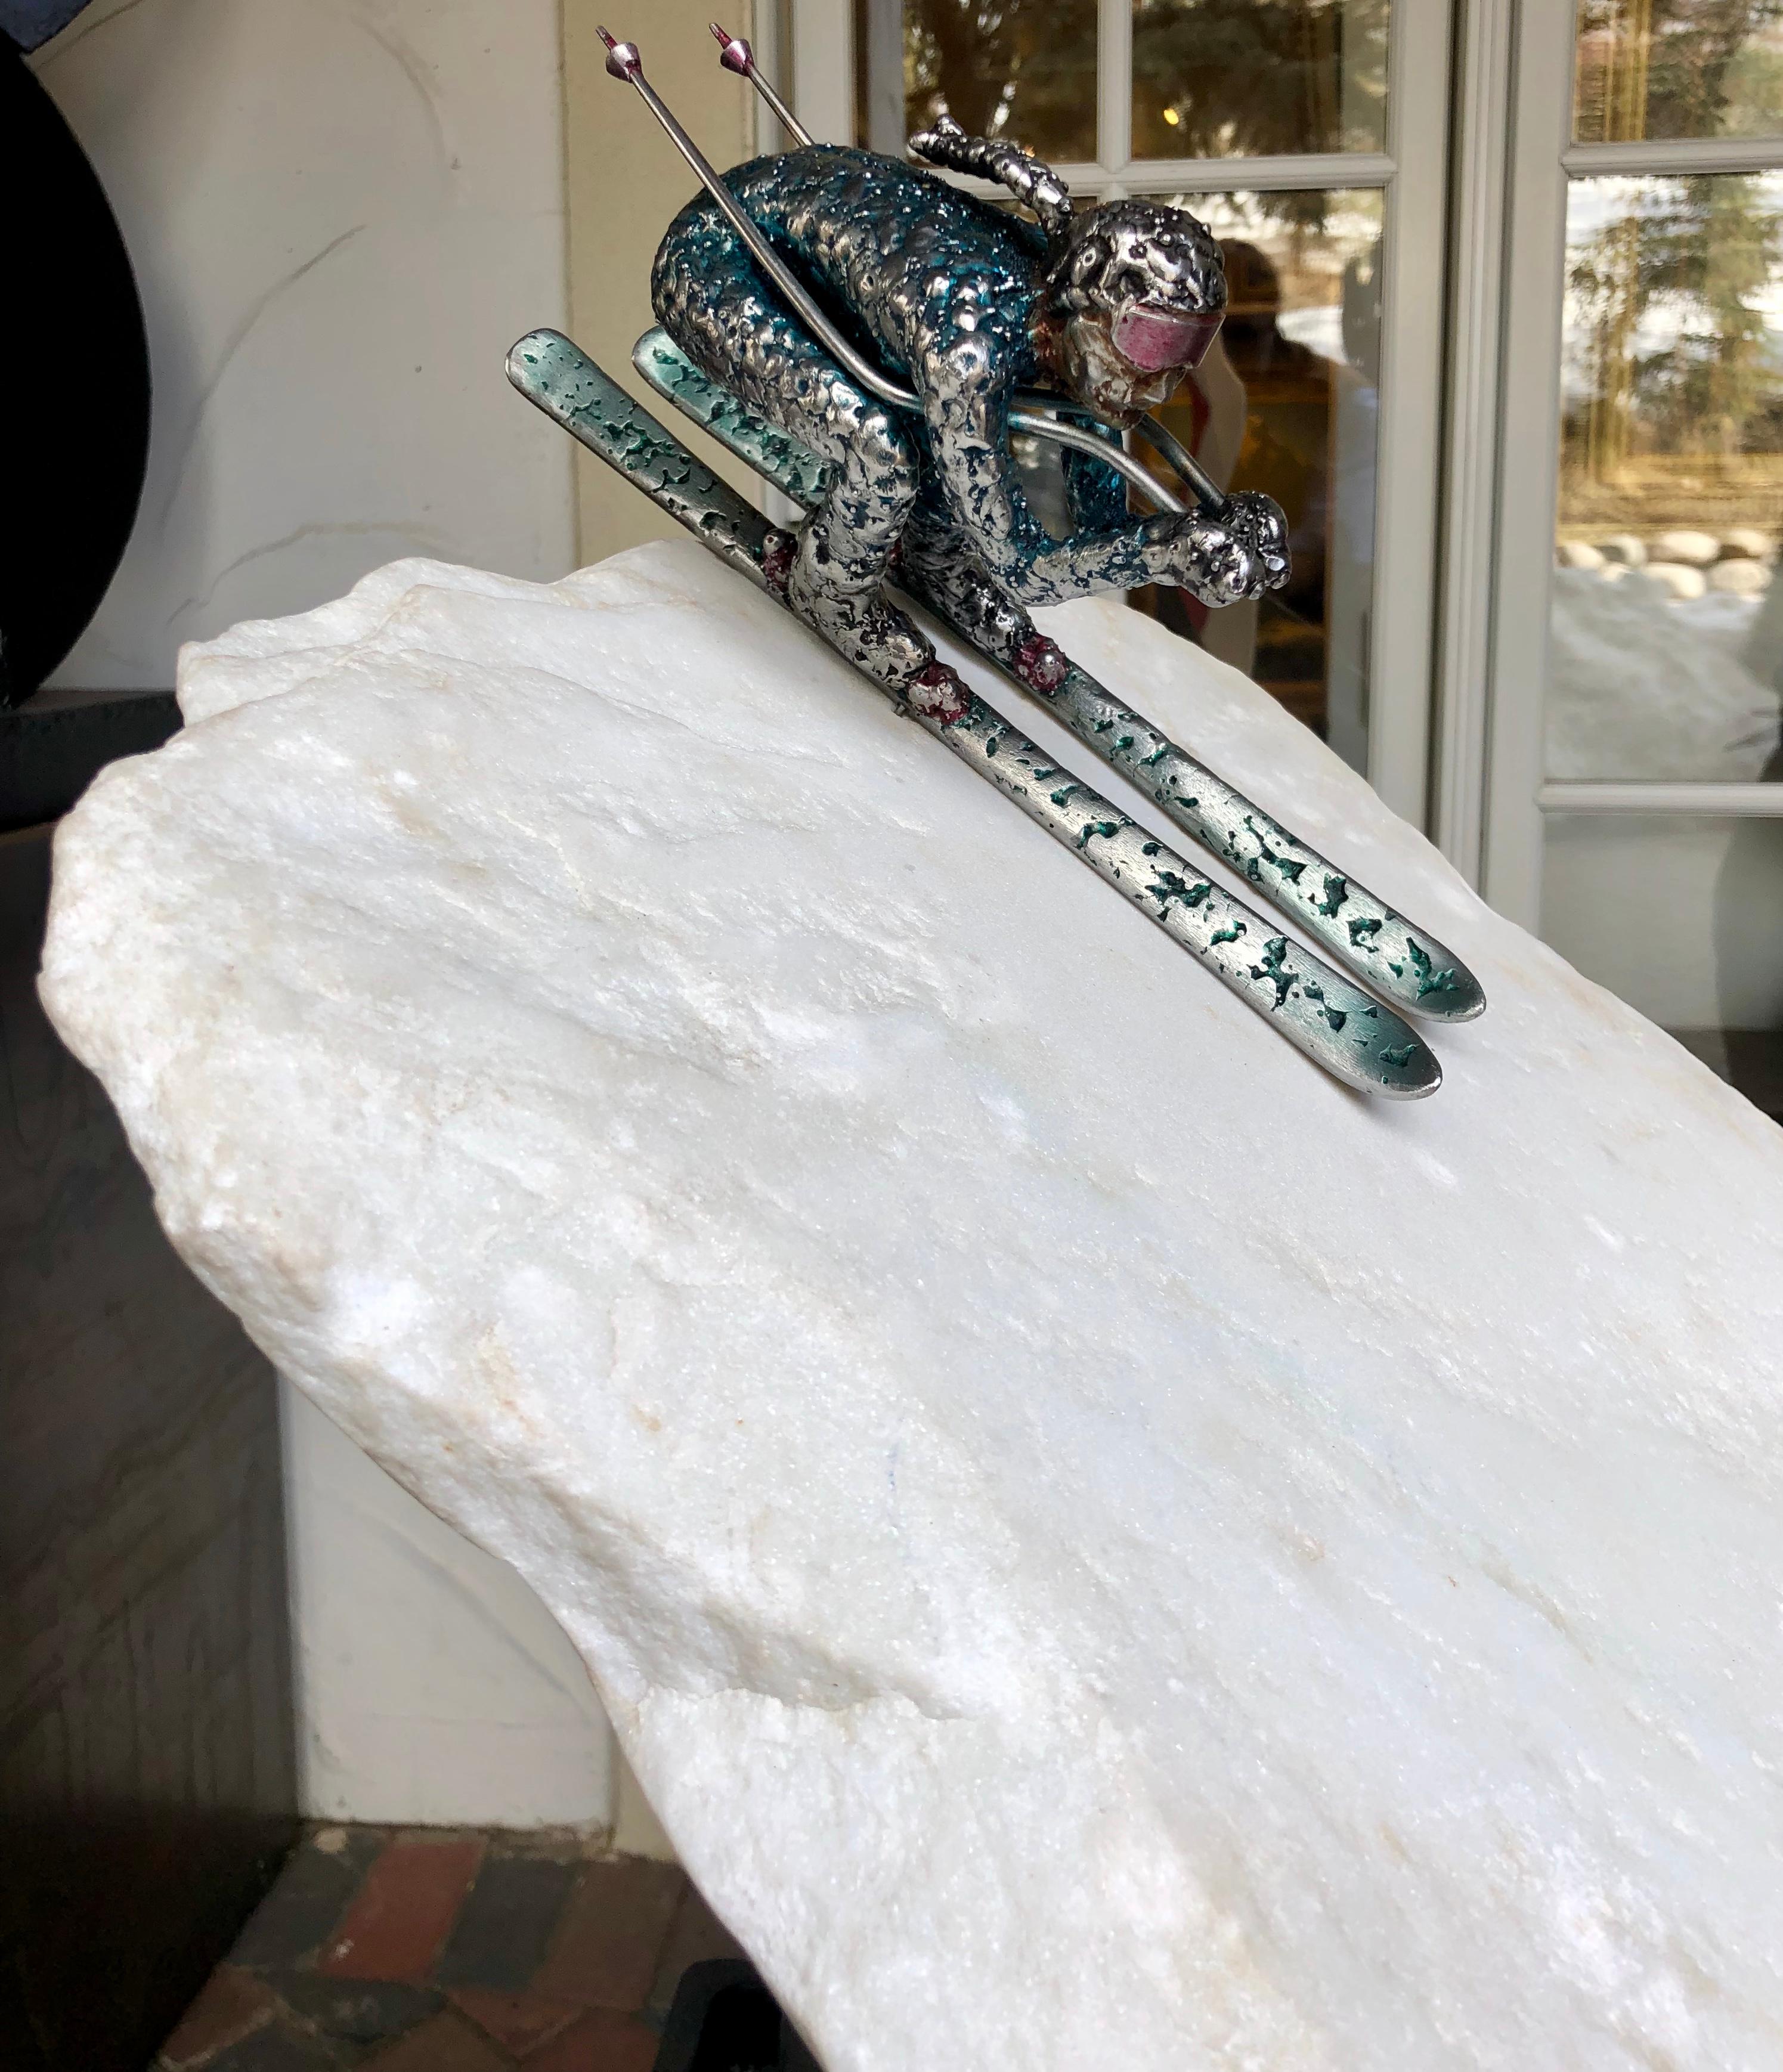 This is a mixed metal and marble sculpture. It is a one of a kind piece. The marble is sourced from Marble, Colorado.

Ricky Sutphin is an American artist, craftsman, and inventor based in Colorado. His art is inspired from a lifetime of living